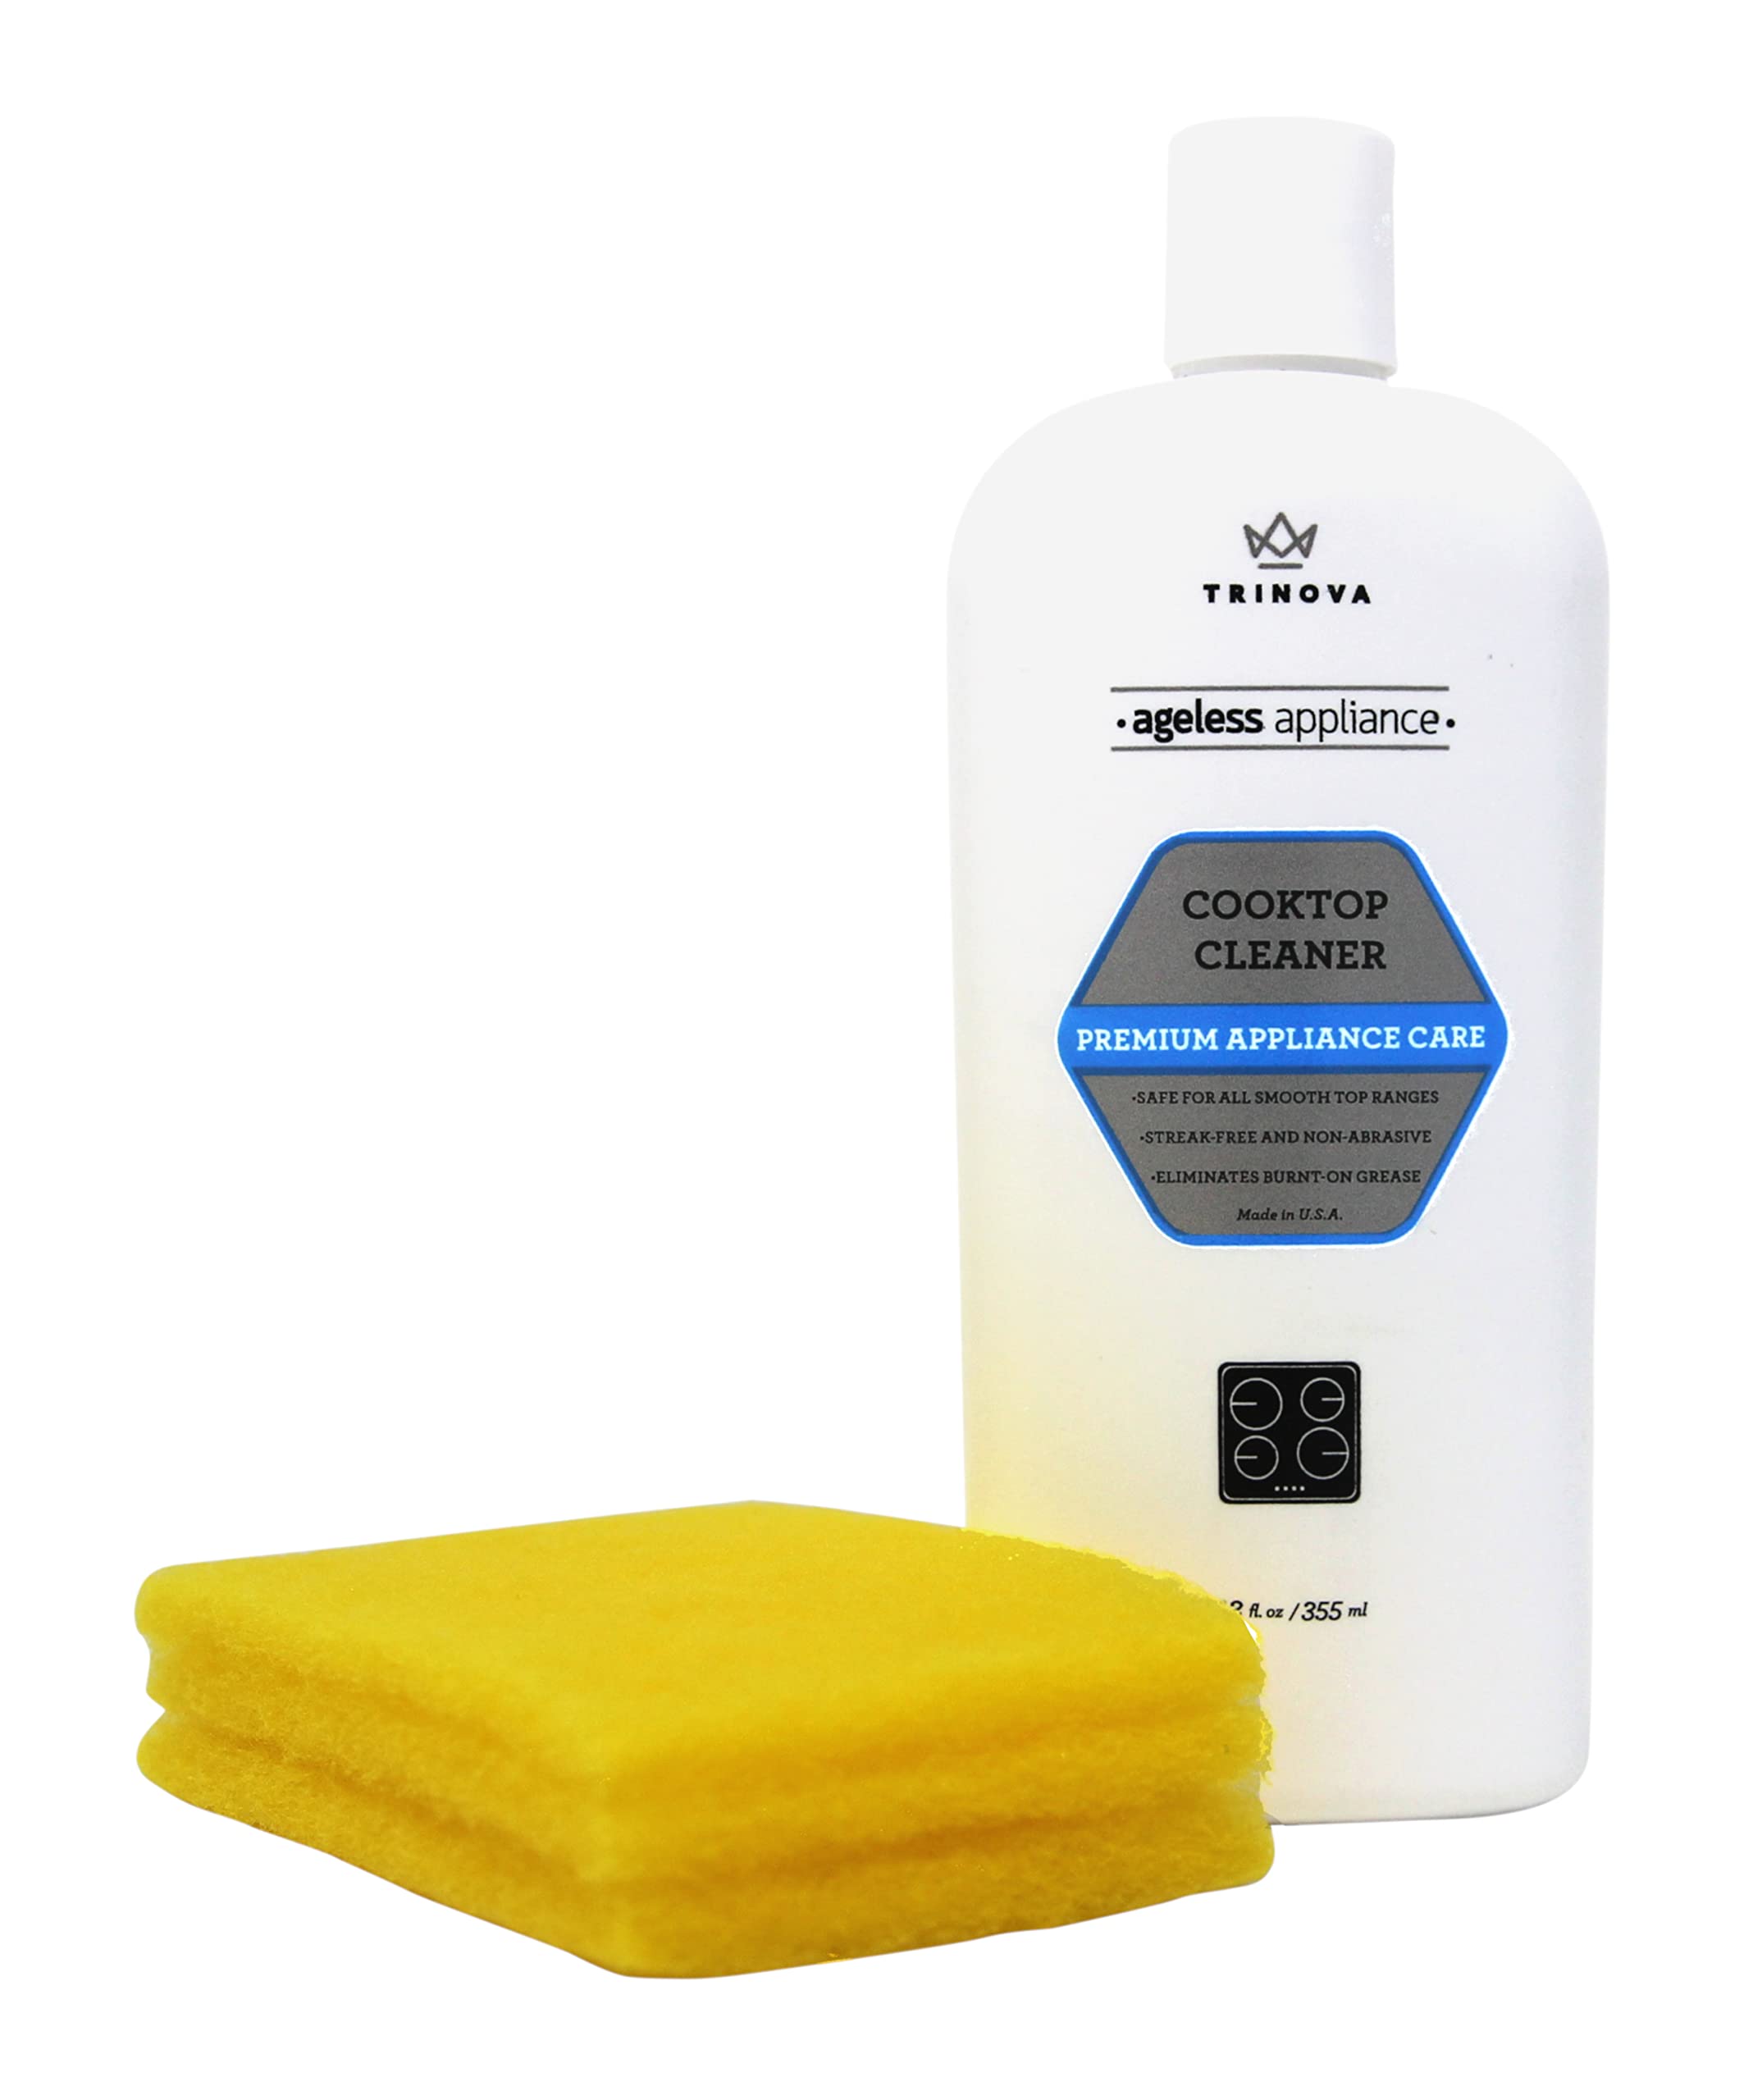 Best Cleaning Sponge with Nonabrasive Scrubber Pad.